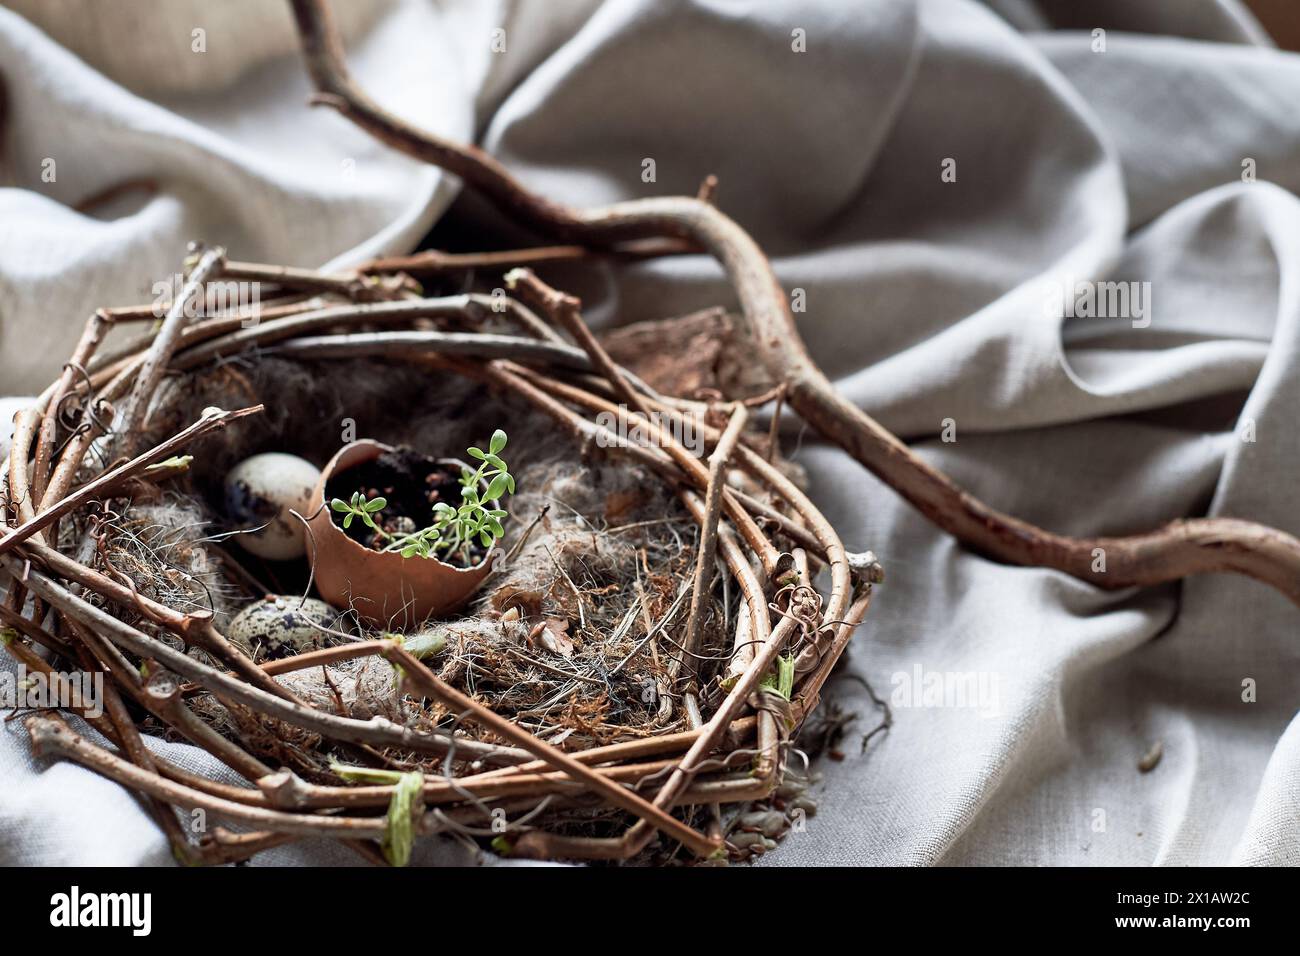 A bird nest made of twigs, grass, and natural materials, with a broken egg inside. The nest is built on the ground using soil, wood, and terrestrial p Stock Photo